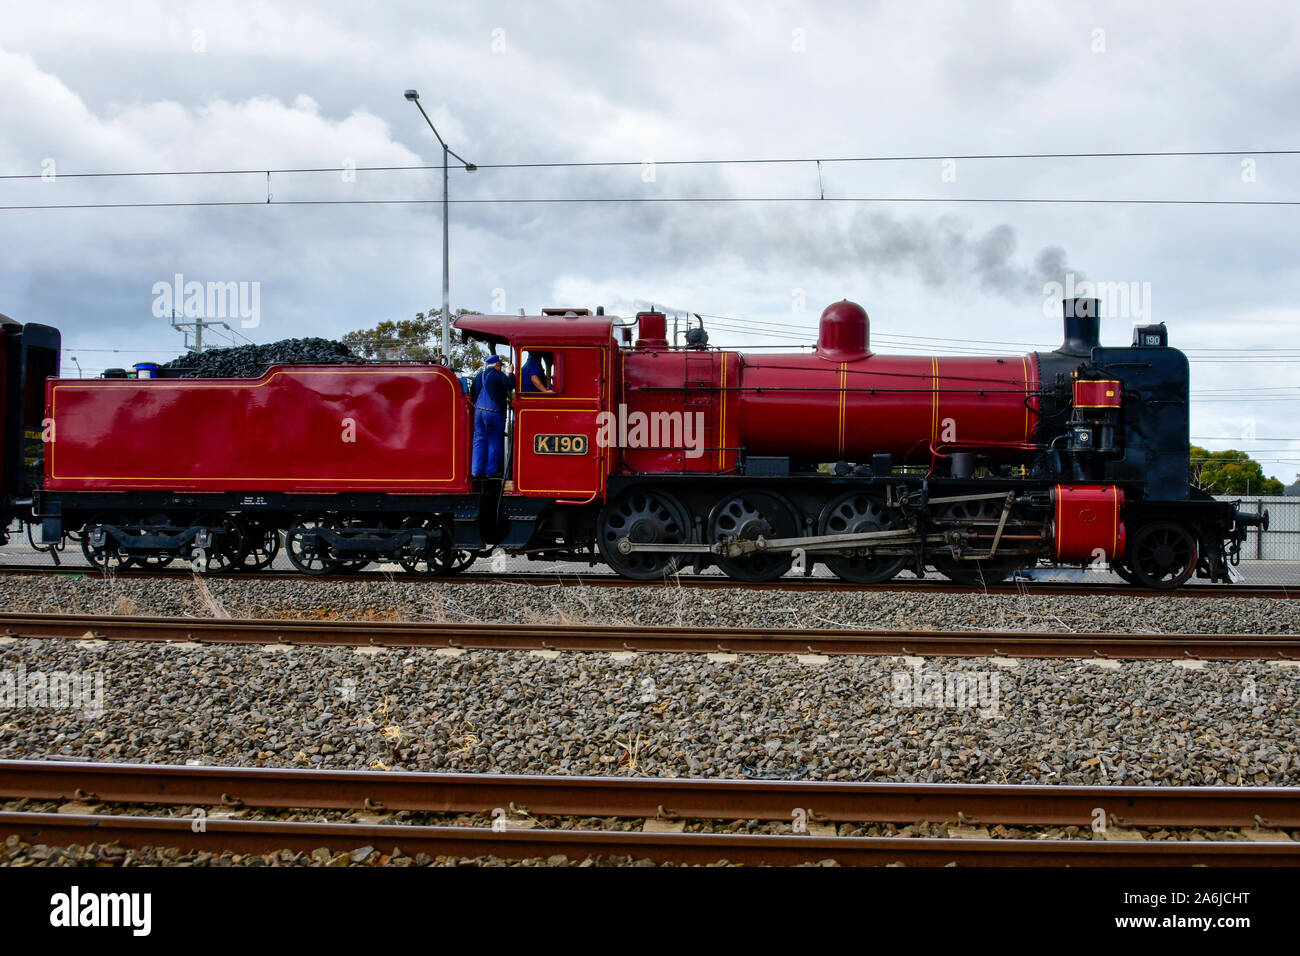 K190 Red Steam Train Victorian Era  Stationary en-route to Geelong at Hoppers Crossing Melbourne Victoria Australia Stock Photo